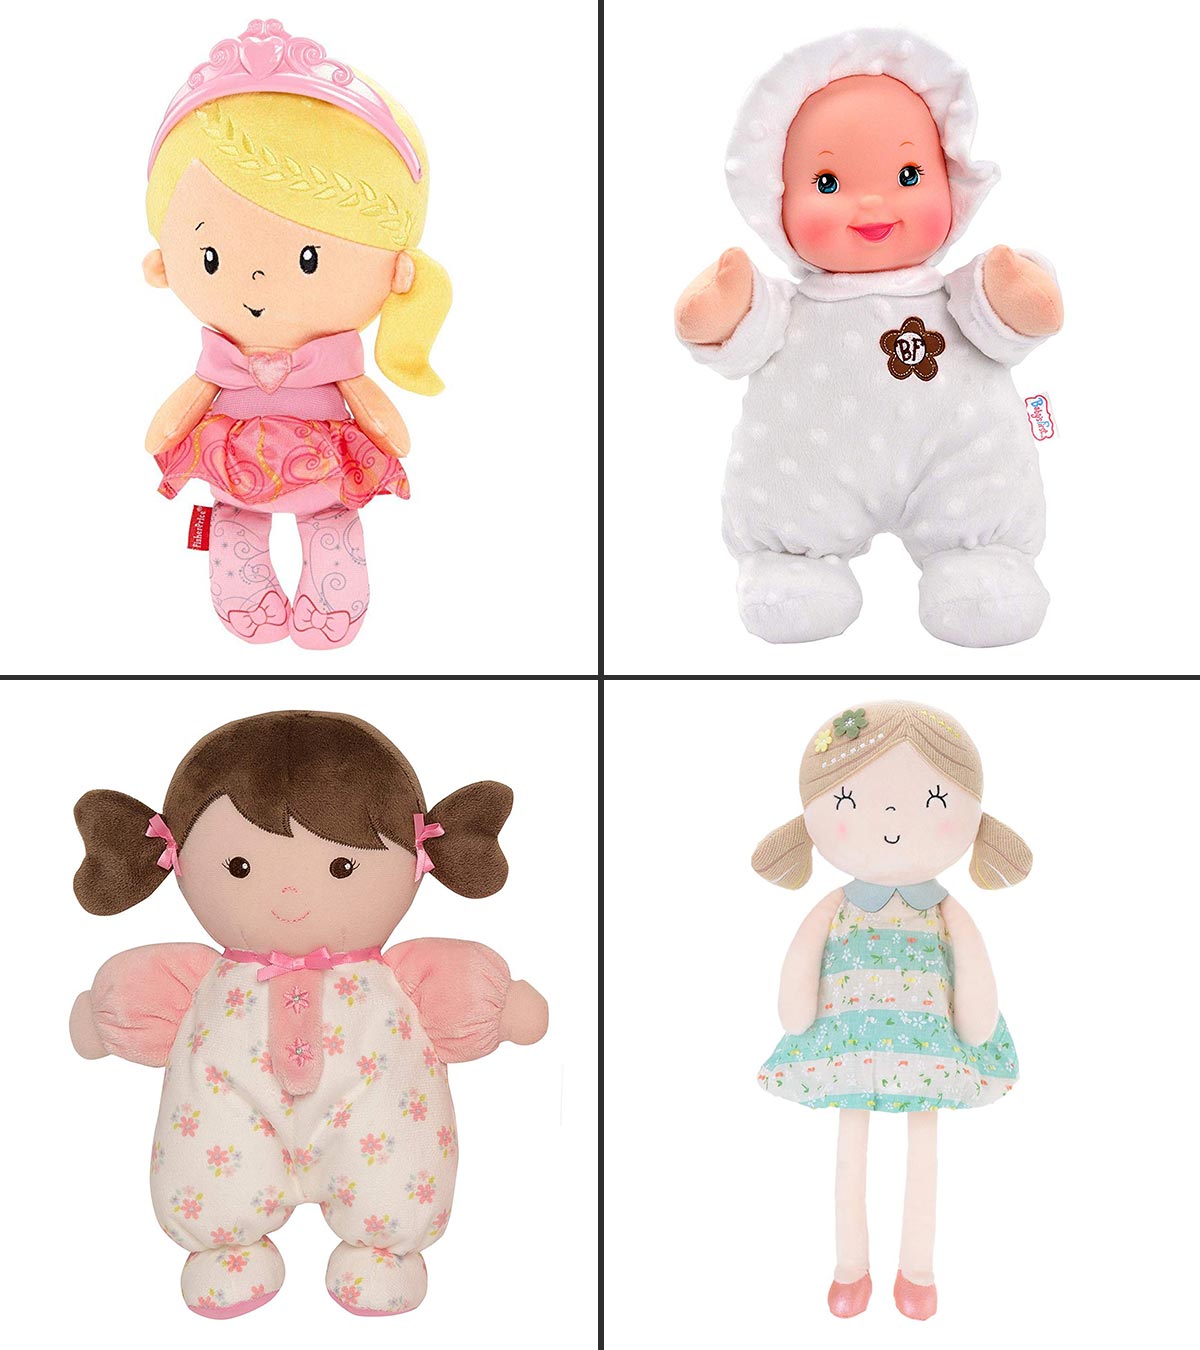 25 Best Baby Dolls For Your Little Ones To Buy In 2022